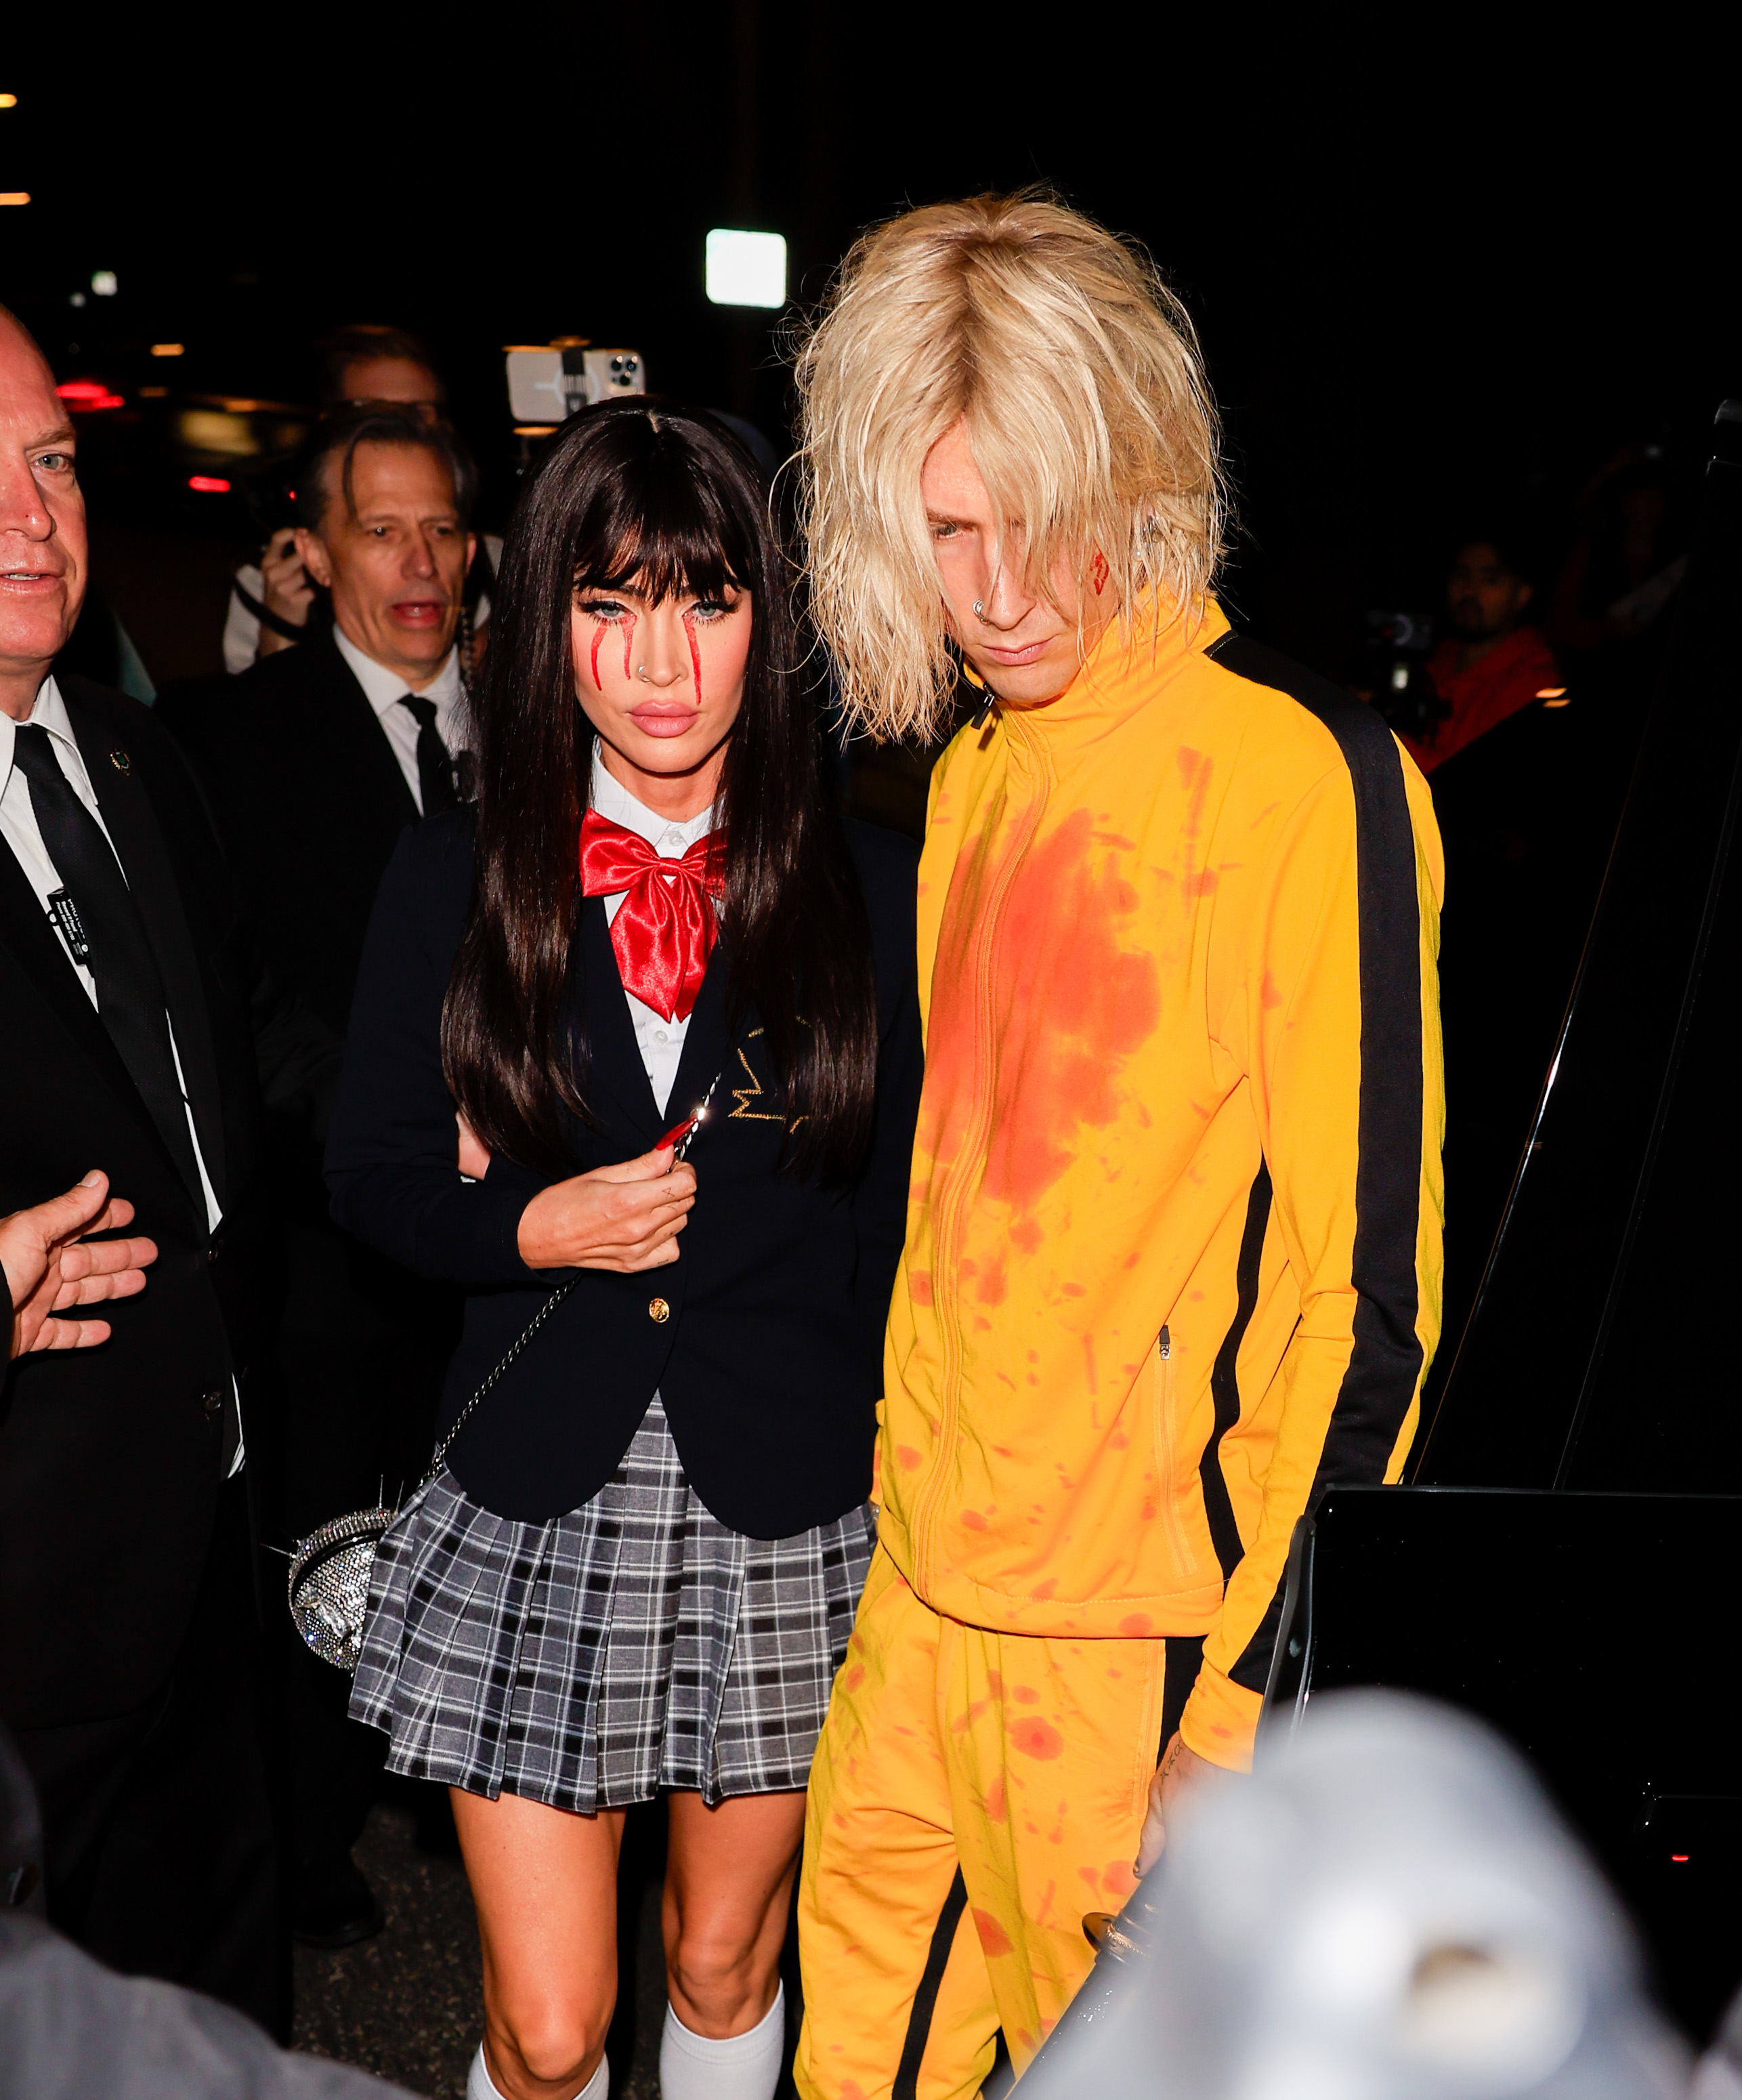 the two dressed as kill bill characters